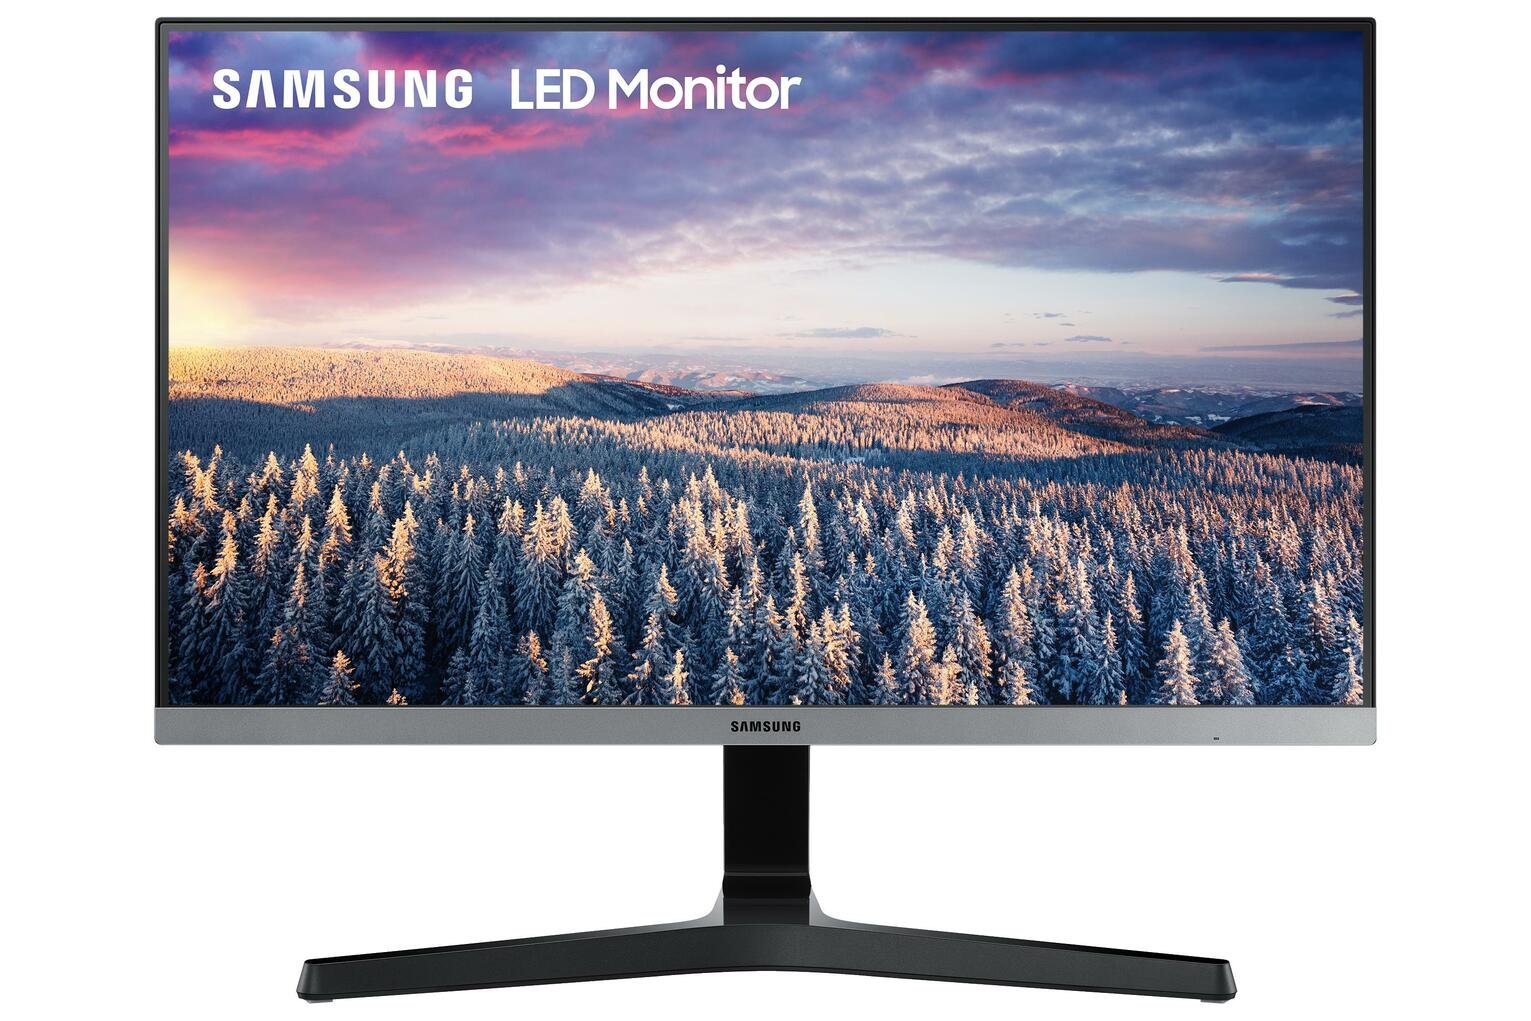 Samsung SR35 22in 75Hz Monitor Review